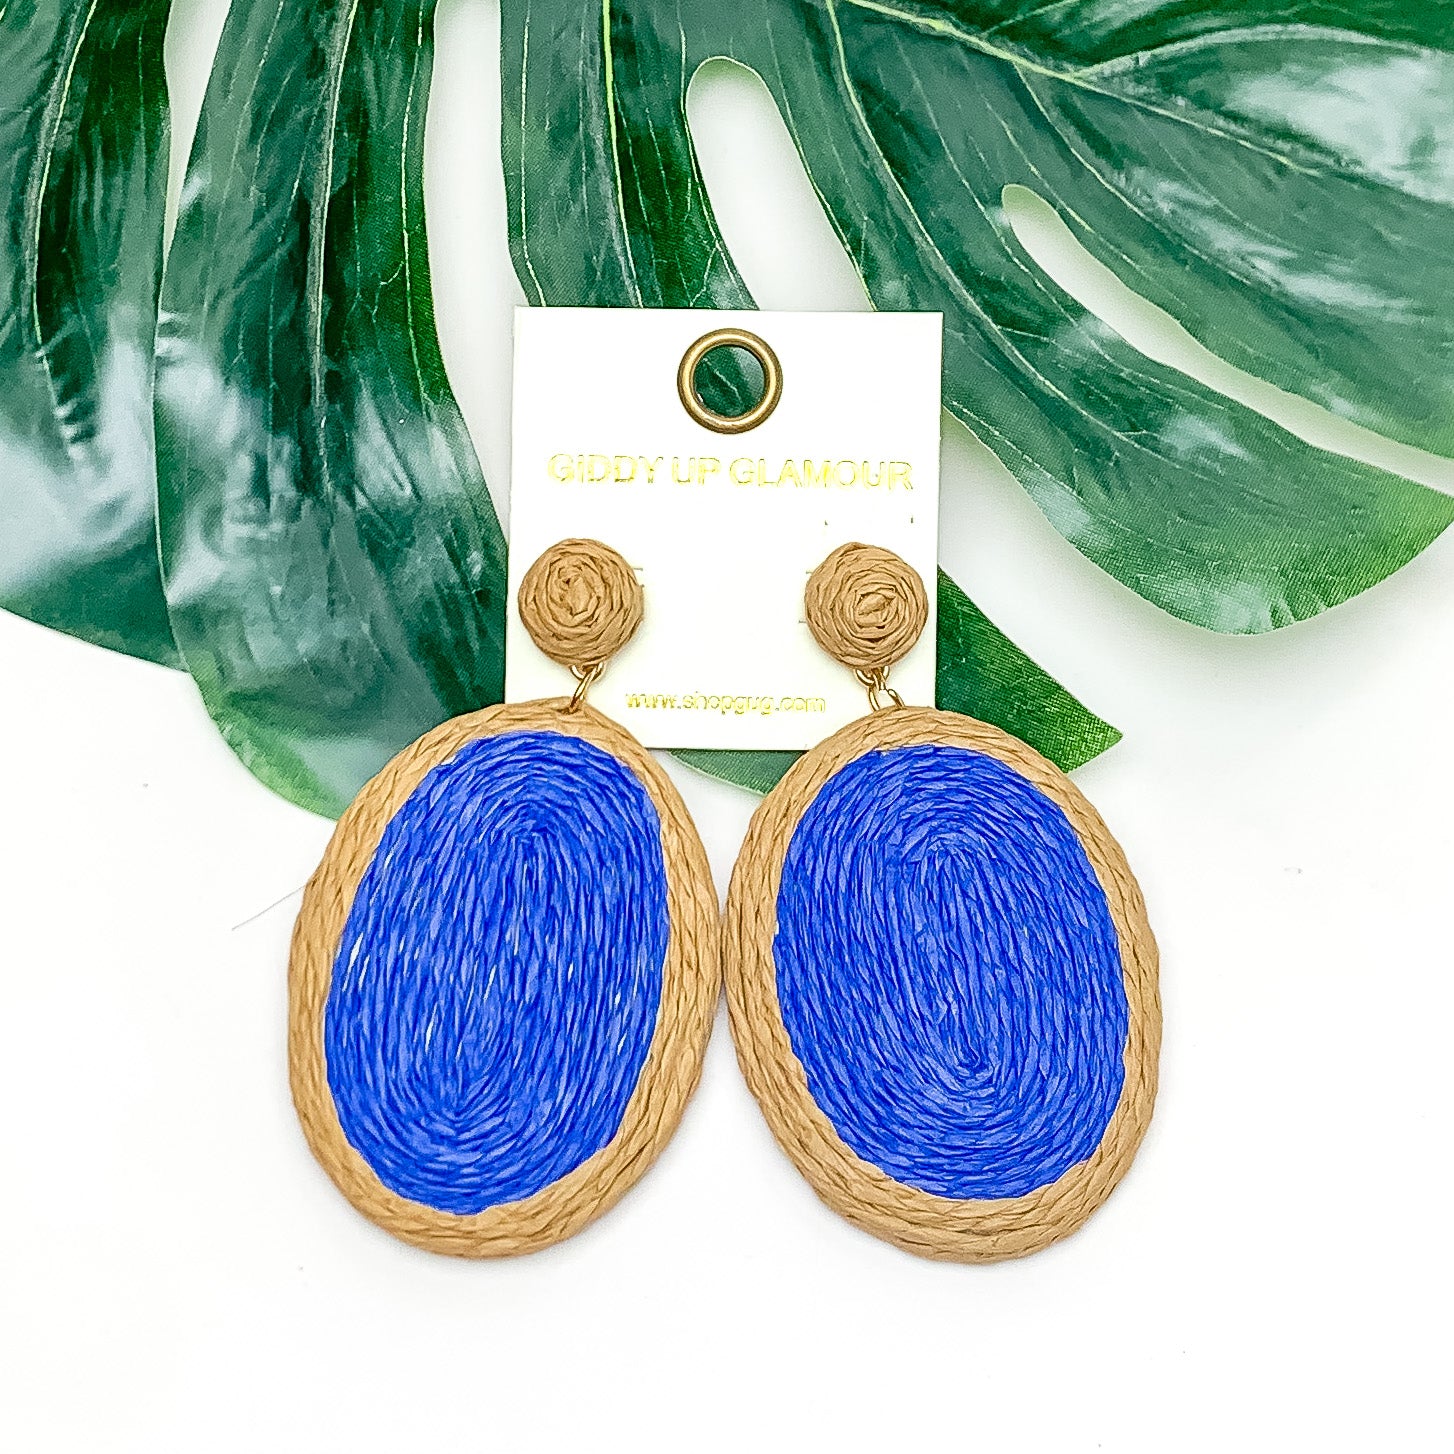 Brunch Bash Raffia Wrapped Oval Earrings Royal Blue. Pictured on a white background with a large leaf behind the earrings.